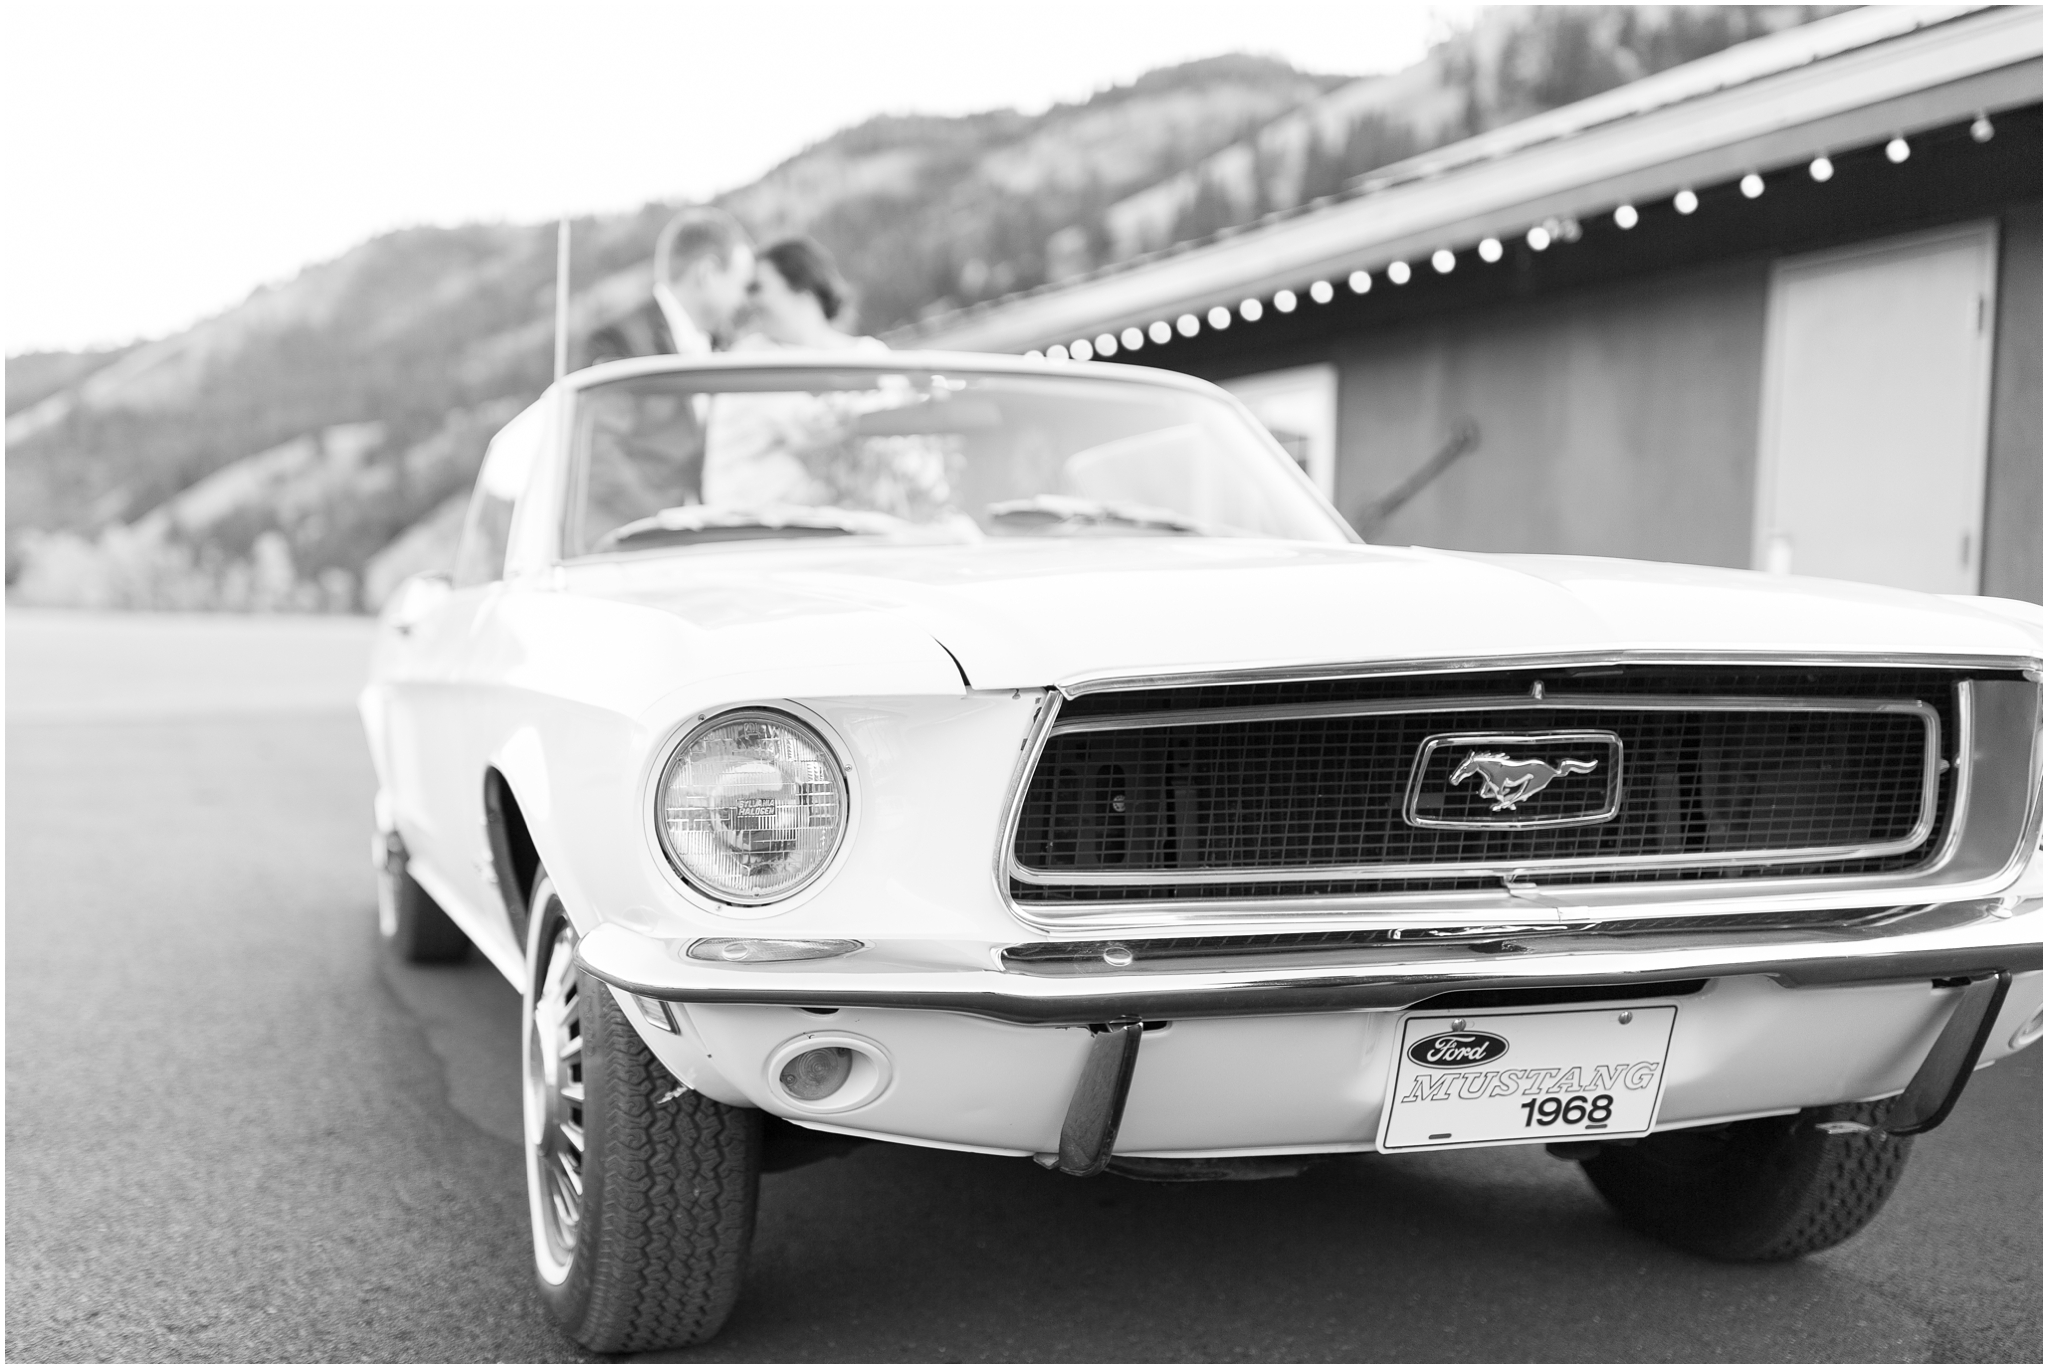 This American Homestead wedding was a Yakima wedding captured by Spokane wedding photographer Taylor Rose Photography at one of the best Yakima wedding venues, the American Homestead. Taylor Rose Photography is a Northern Virginia Wedding photographer and DC wedding photographer capturing weddings, engagement sessions and anniversaries across the U.S. and beyond. Including vintage getaway car - mustang.